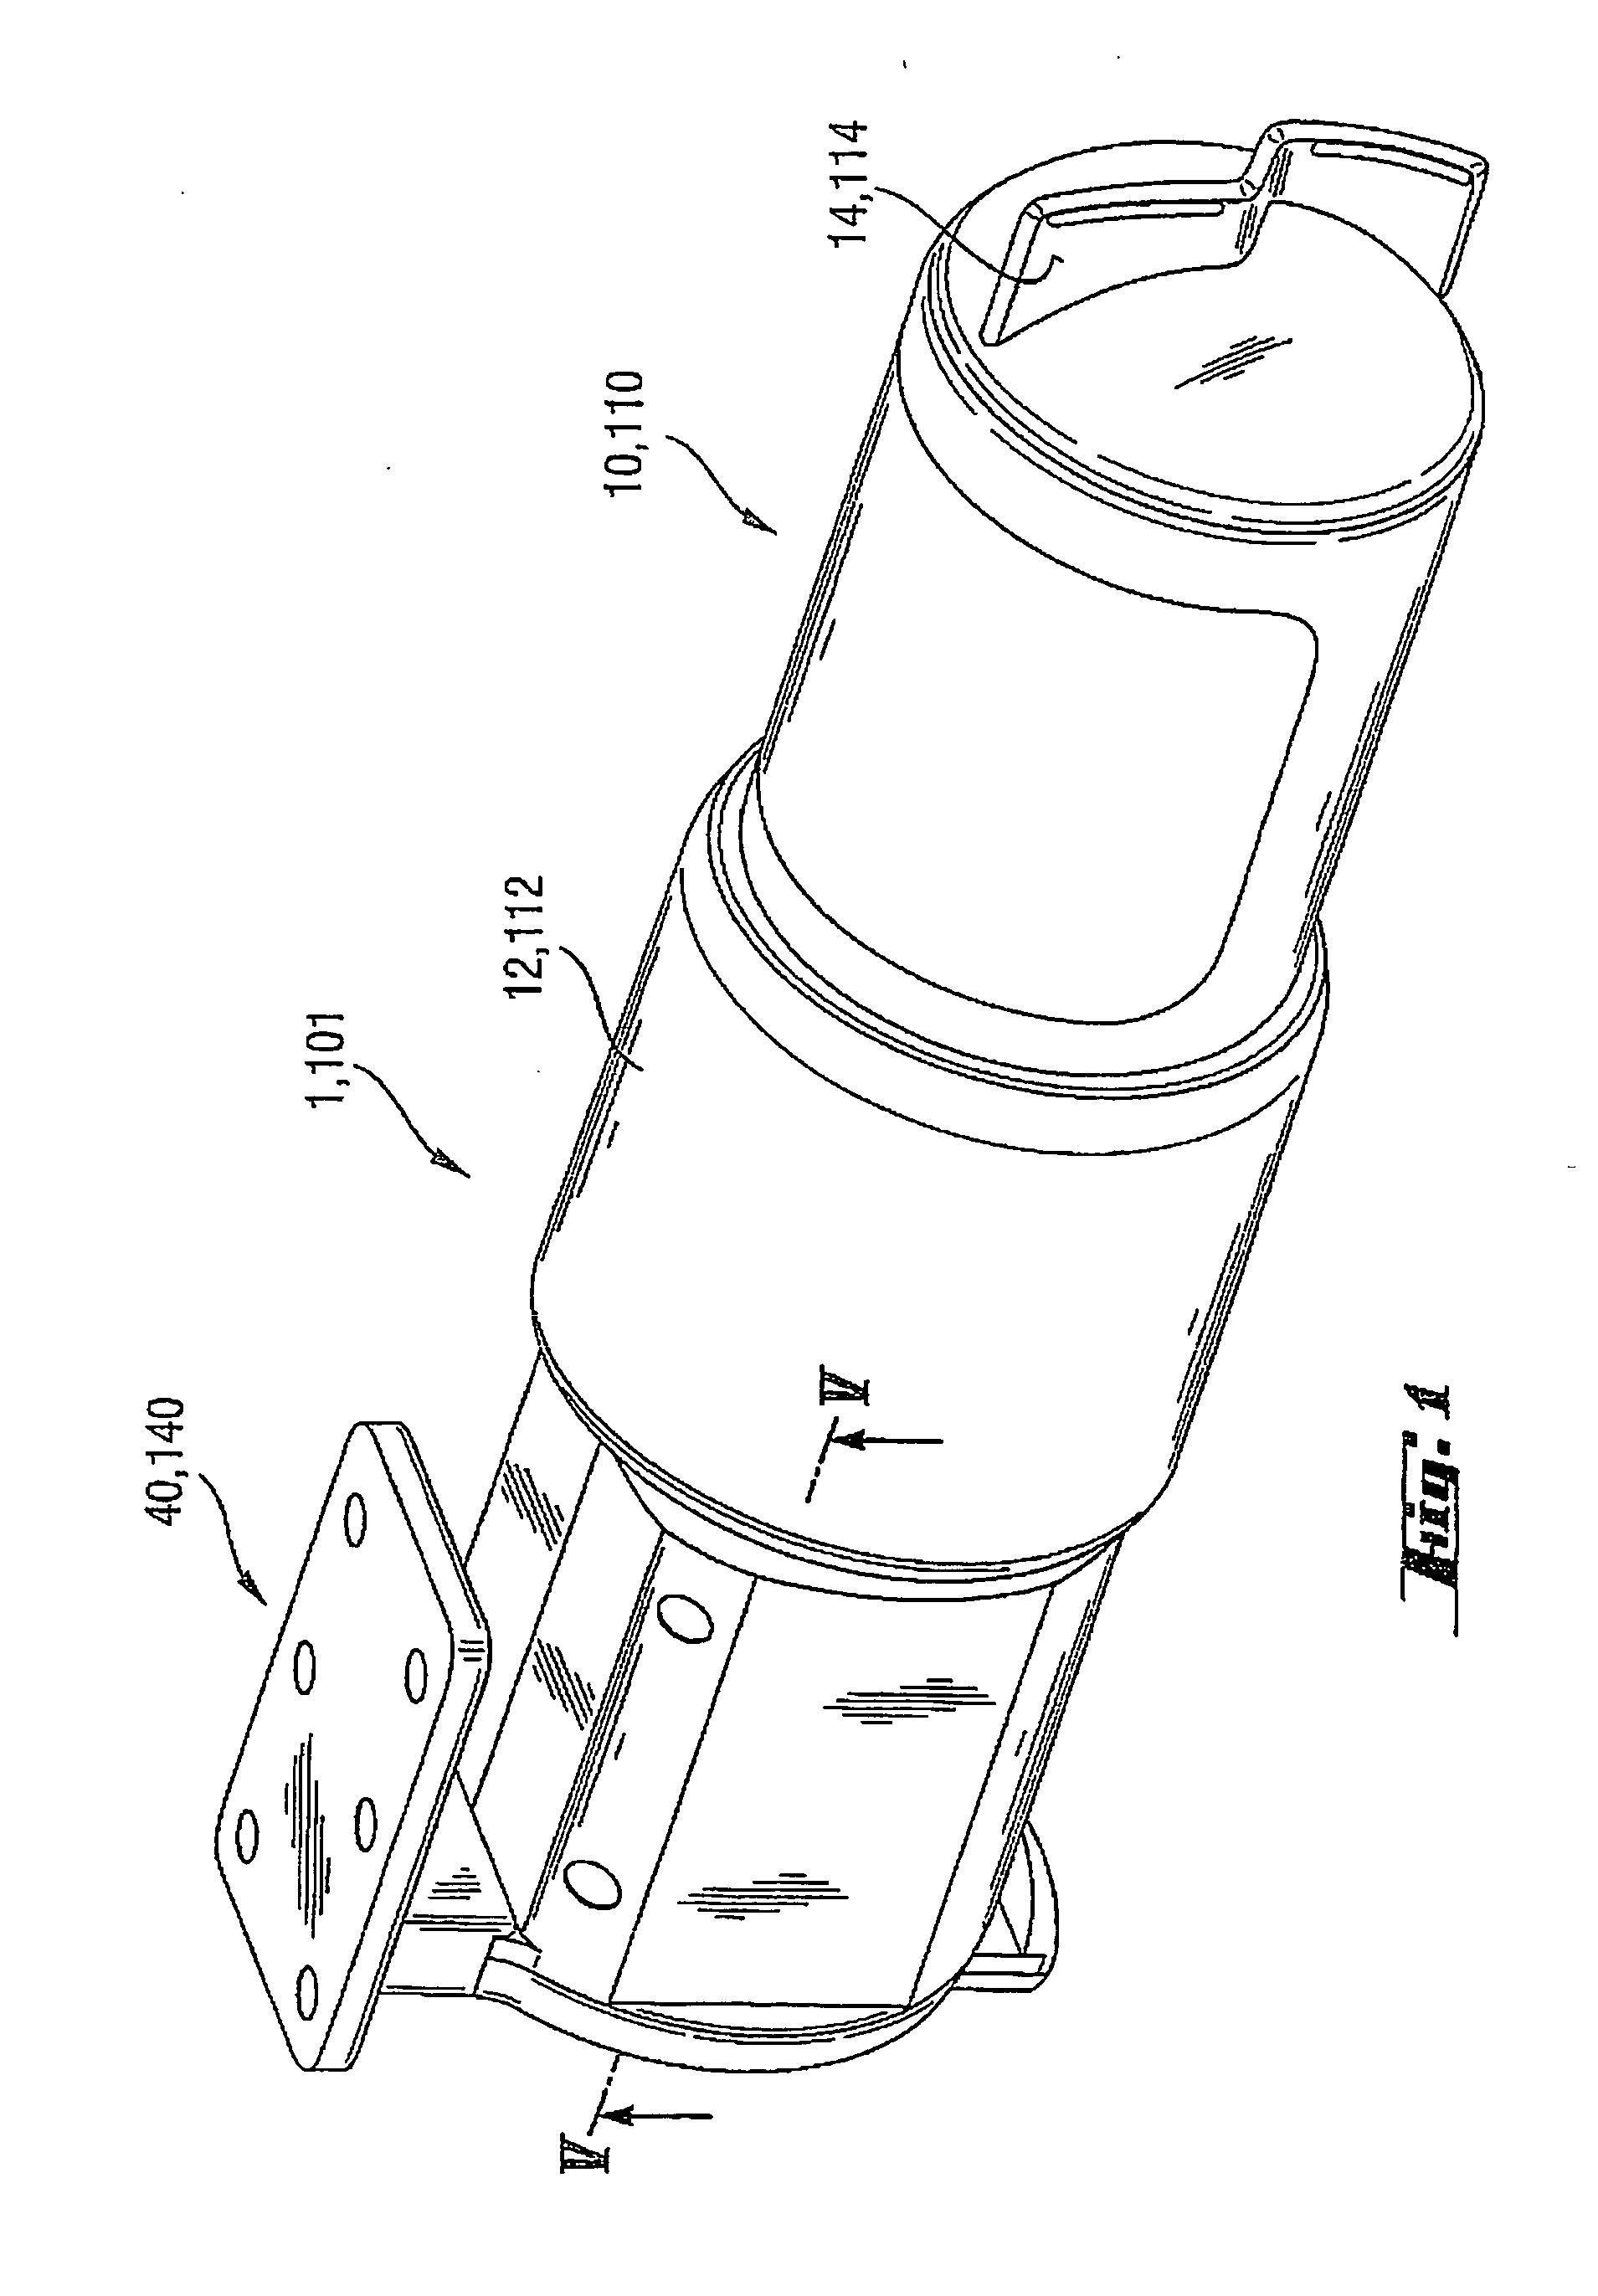 Apparatus for treating water, particularly filter apparatus, and cartridge